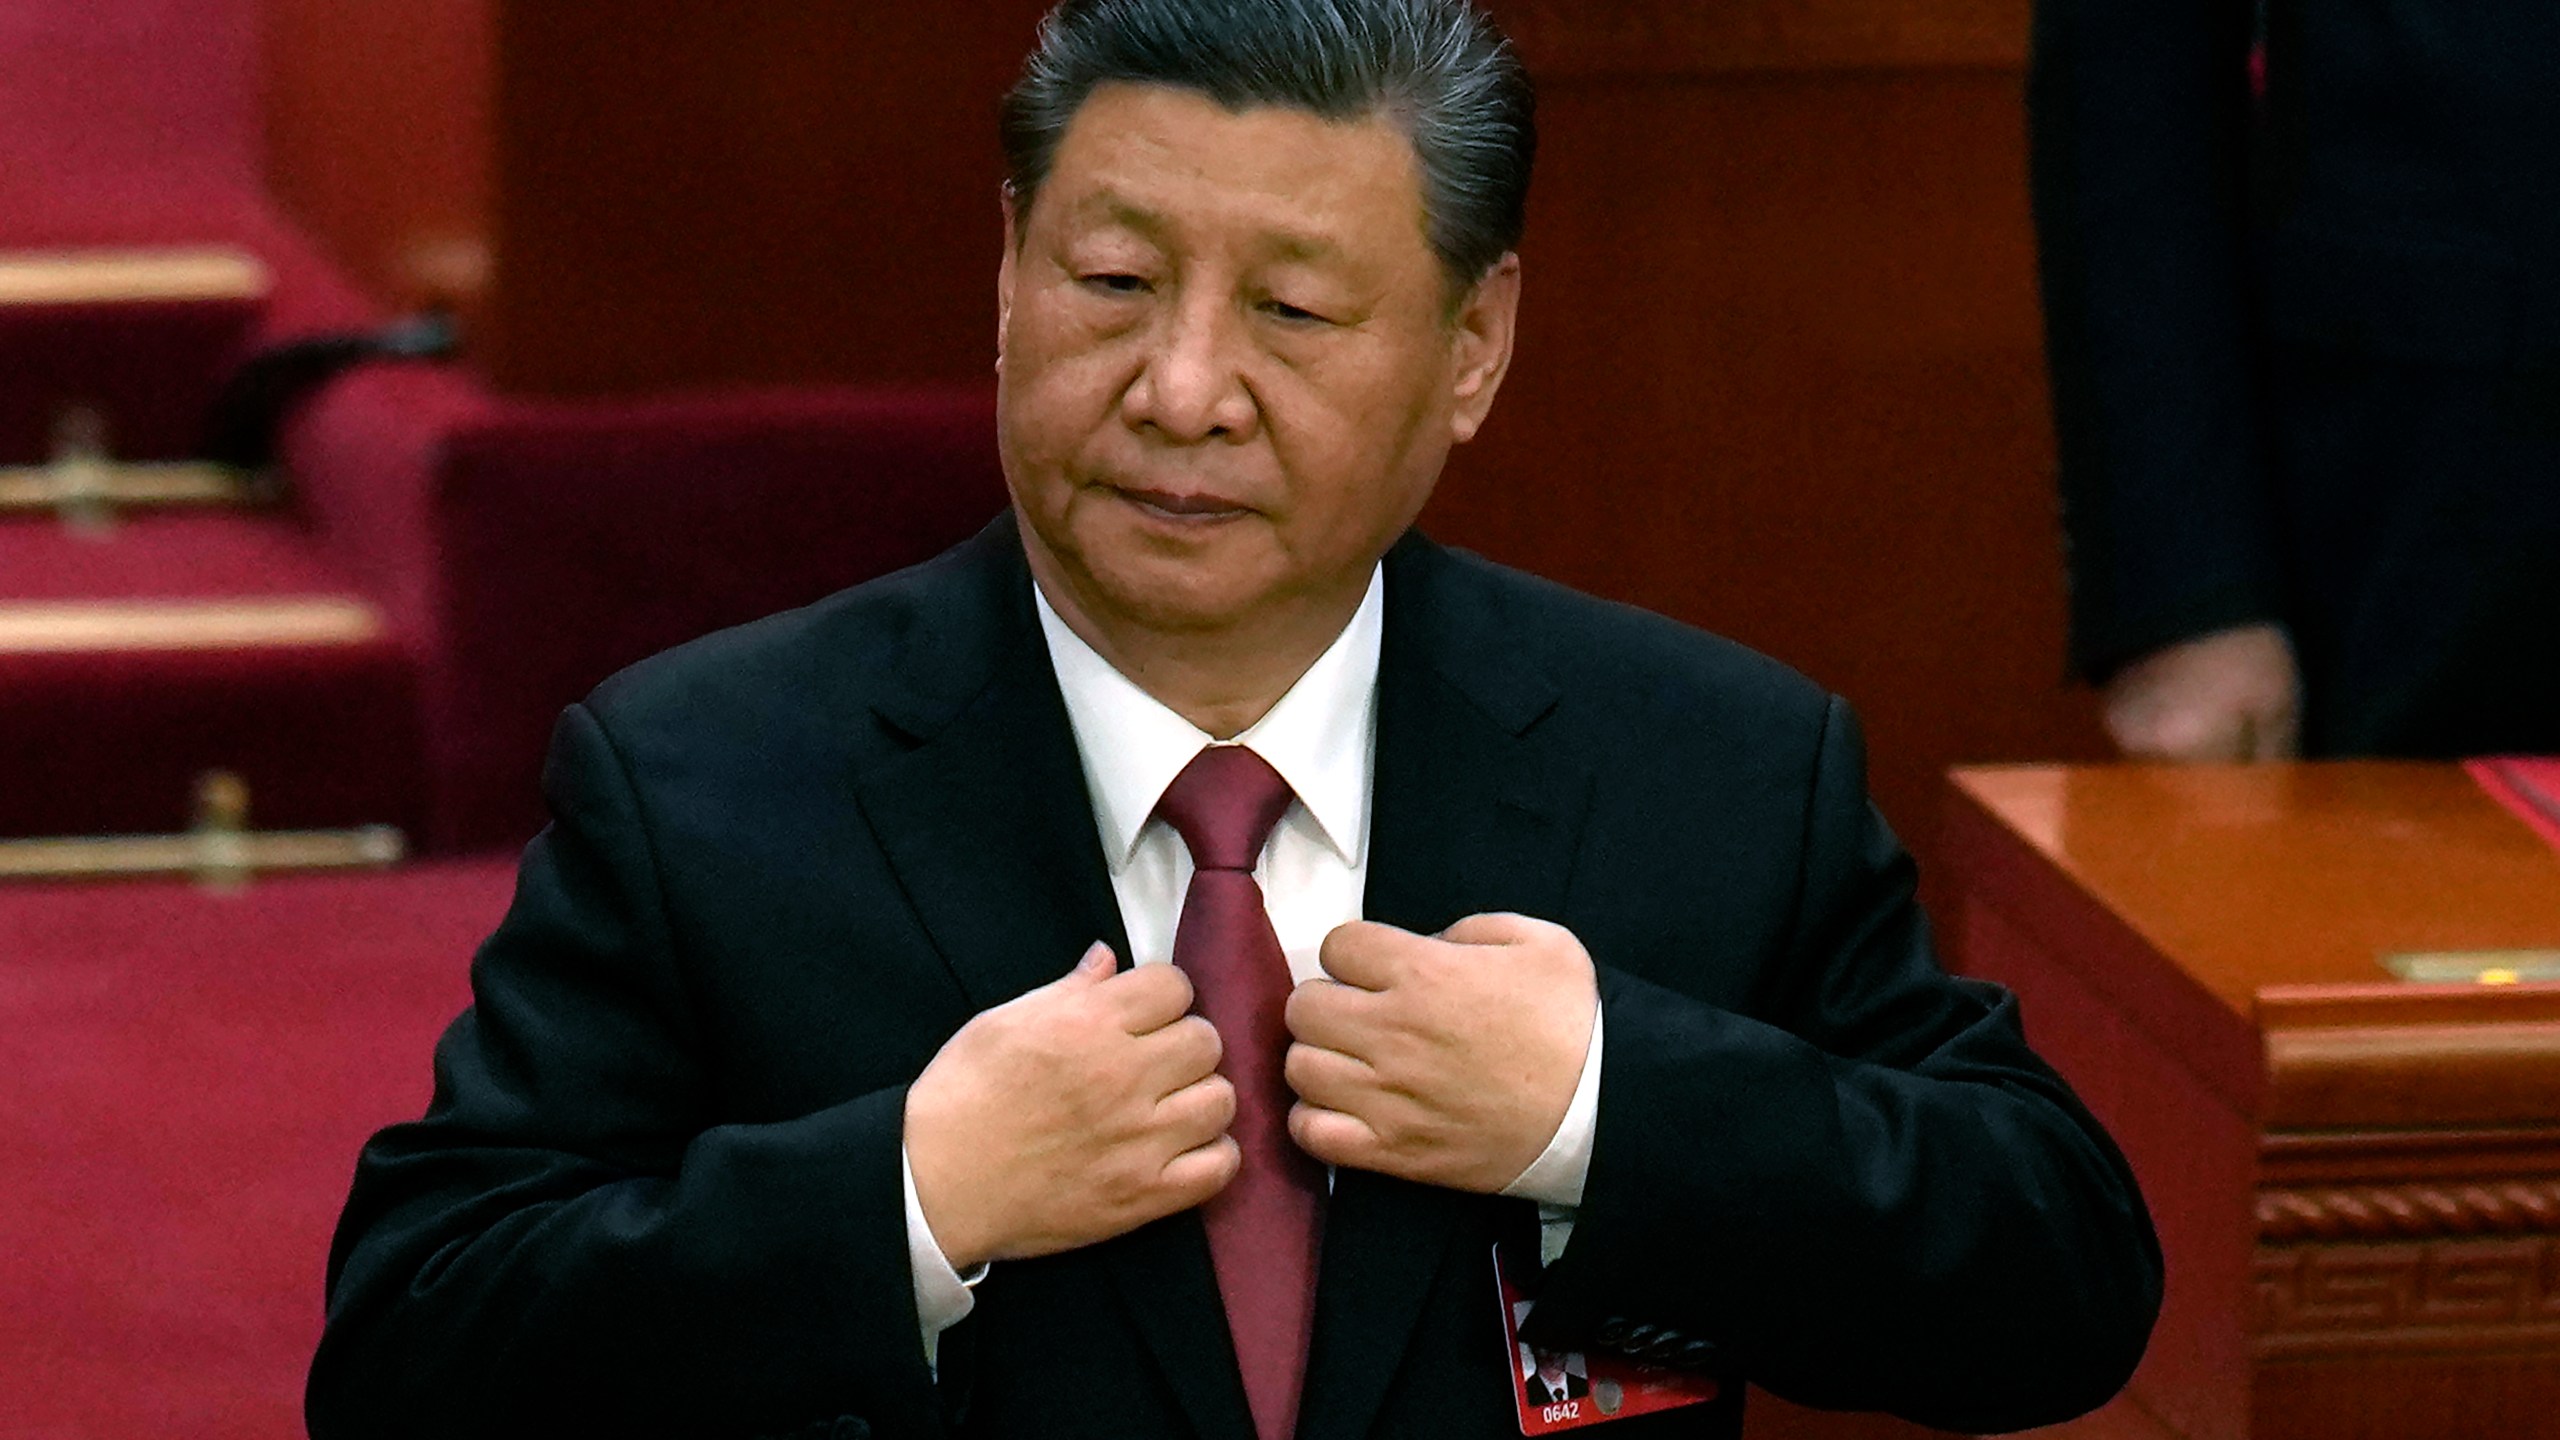 Chinese President Xi Jinping adjusts his jacket during the closing session of the National People's Congress held at the Great Hall of the People in Beijing, Monday, March 11, 2024. This year, China's national legislature resumed its annual in-person meetings in a way that it hadn't done since before the pandemic. Though officials say China is back to business, in practice, the meetings have become even more tightly scripted to broadcast Chinese leader Xi Jinping's message, leaving little room for the spontaneity and open engagement the sessions once offered before COVID-19. (AP Photo/Ng Han Guan)